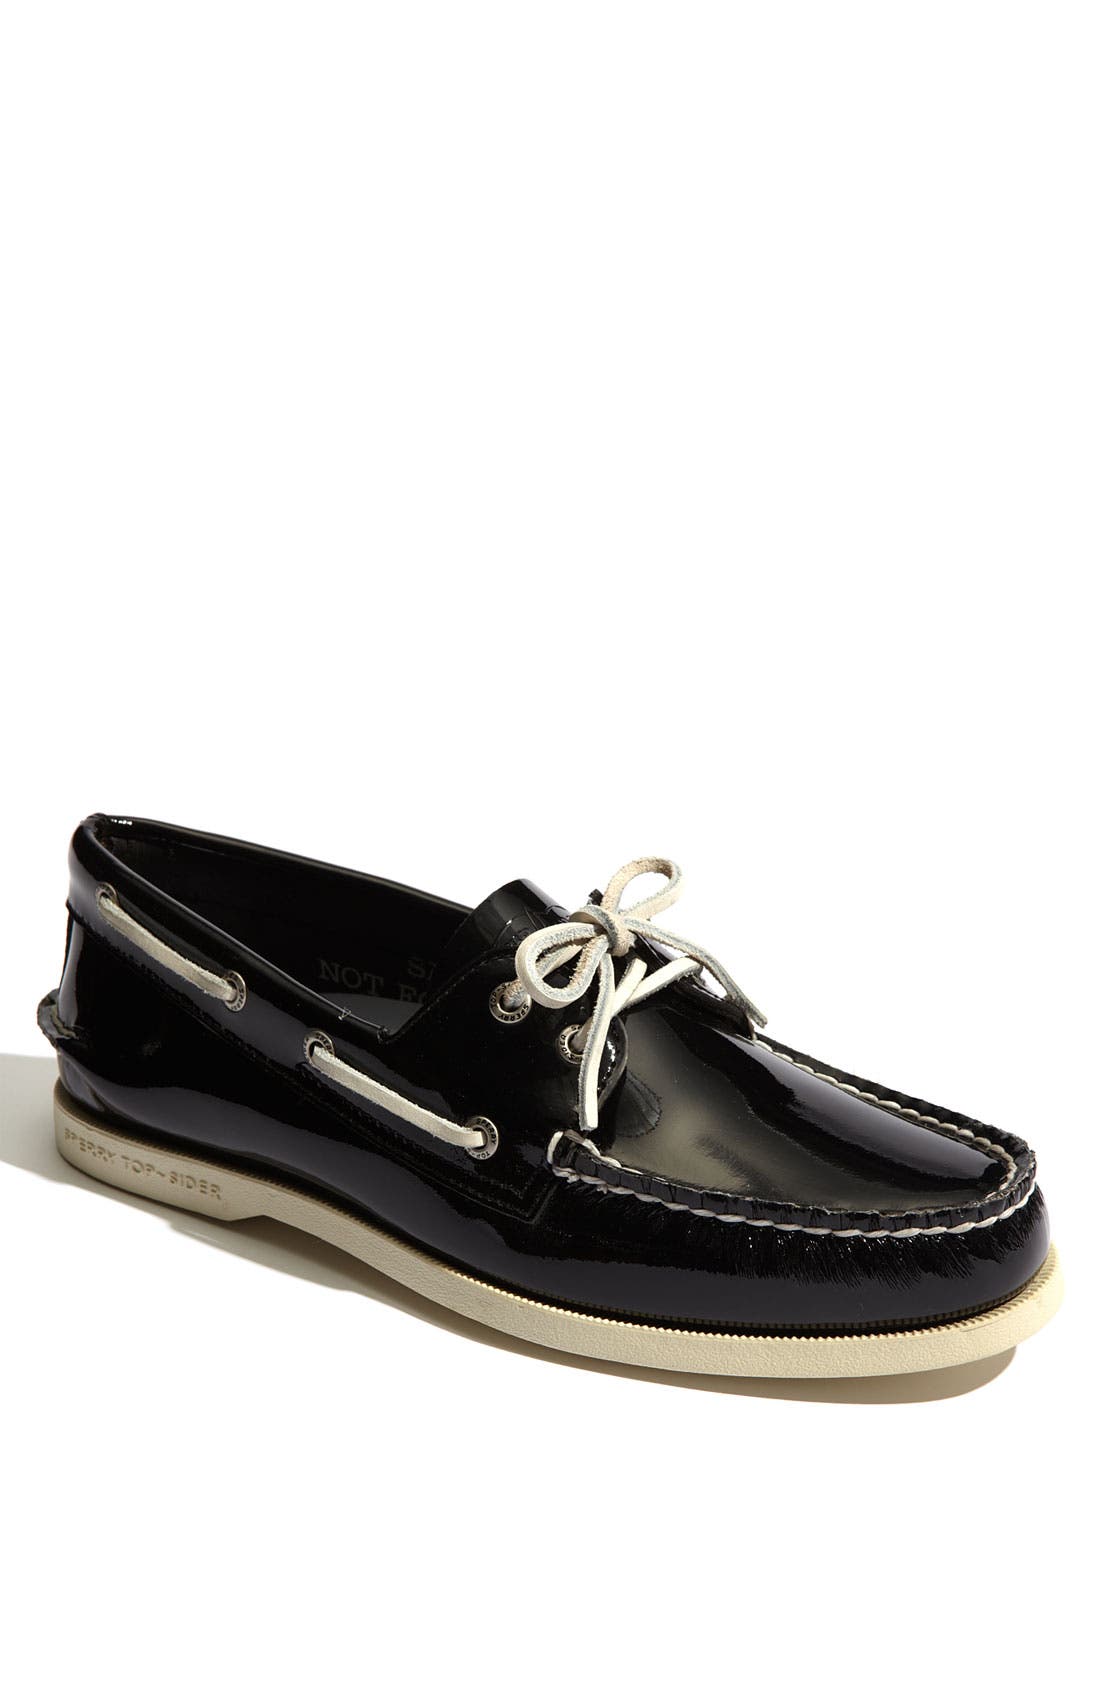 leather sperry boat shoes